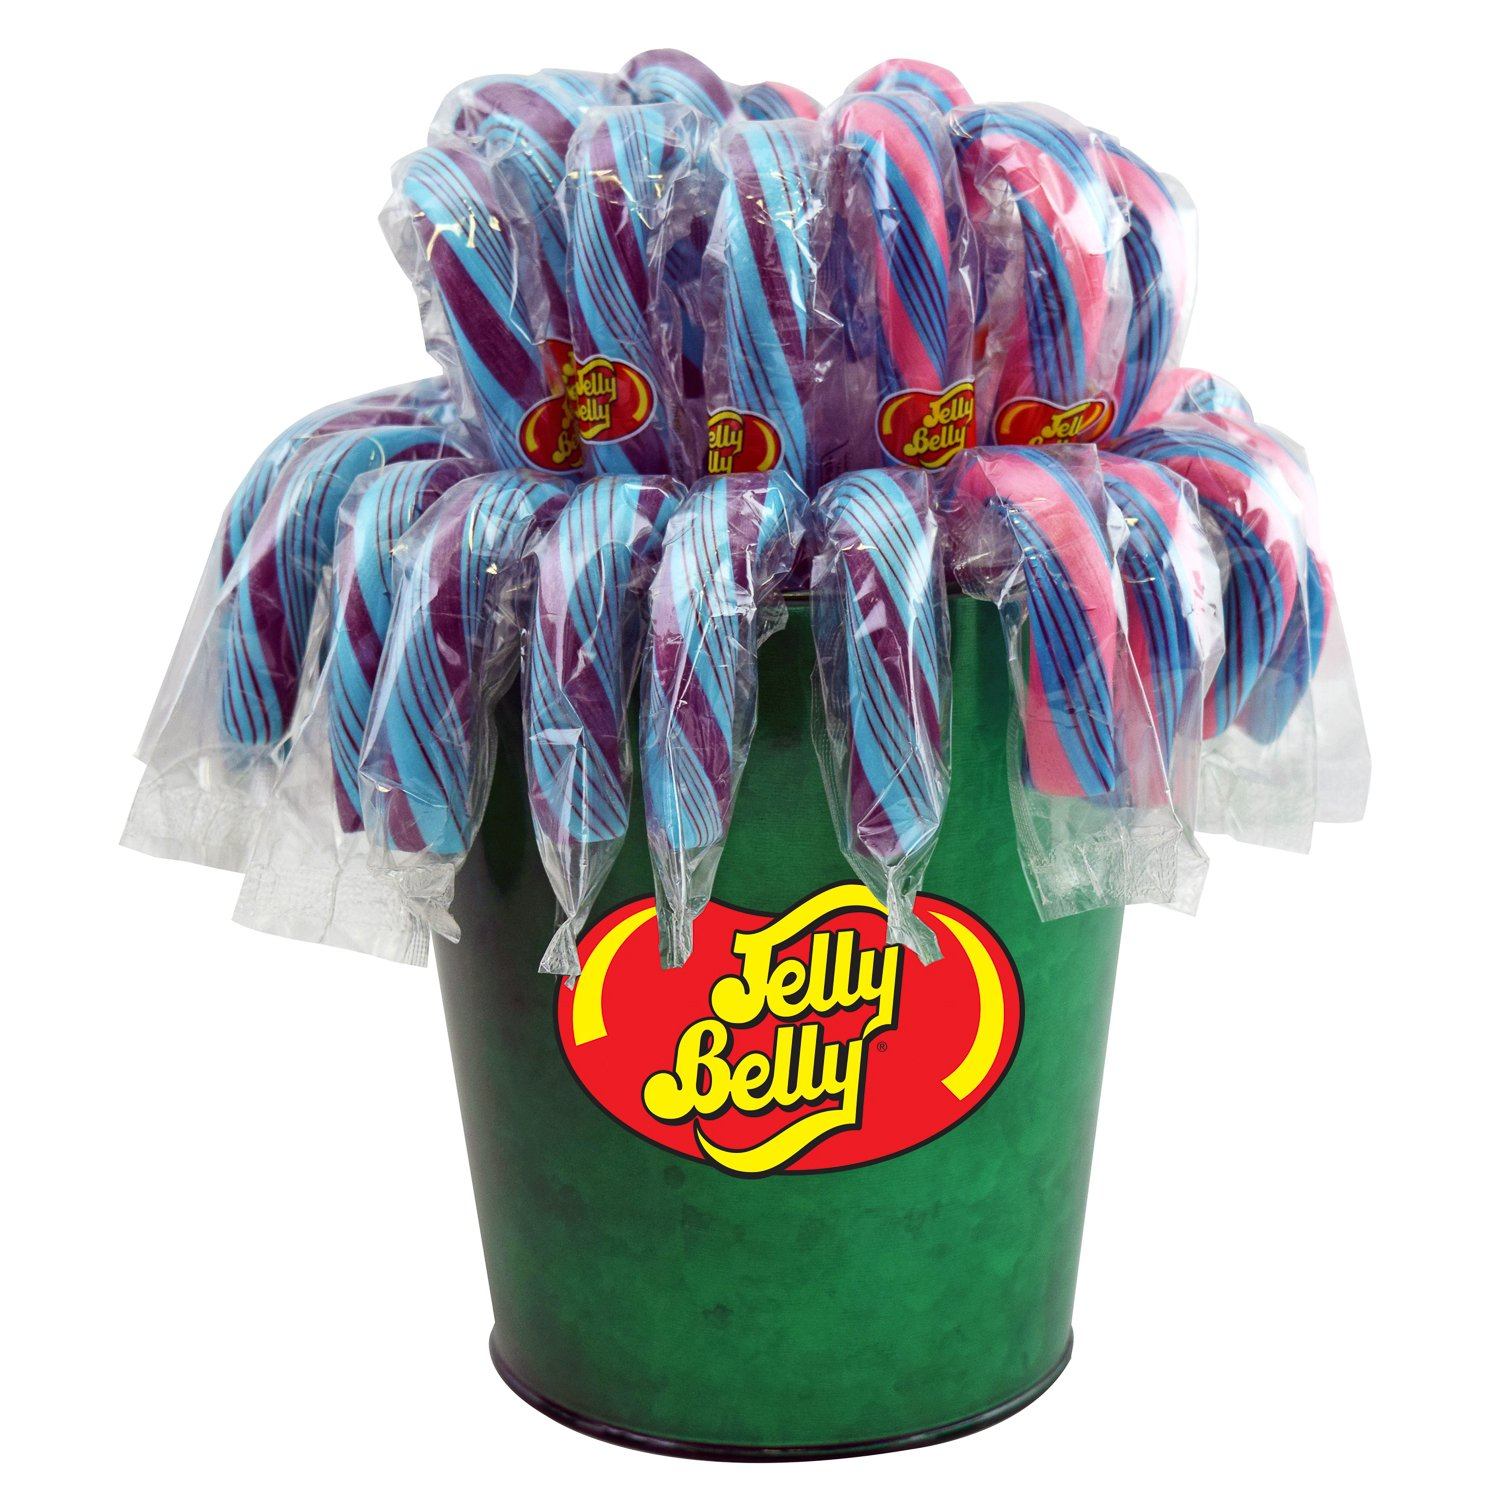 Flavored Candy Canes Spangler Jelly Belly Cotton Blueberry 2.3 Oz-30 Count 